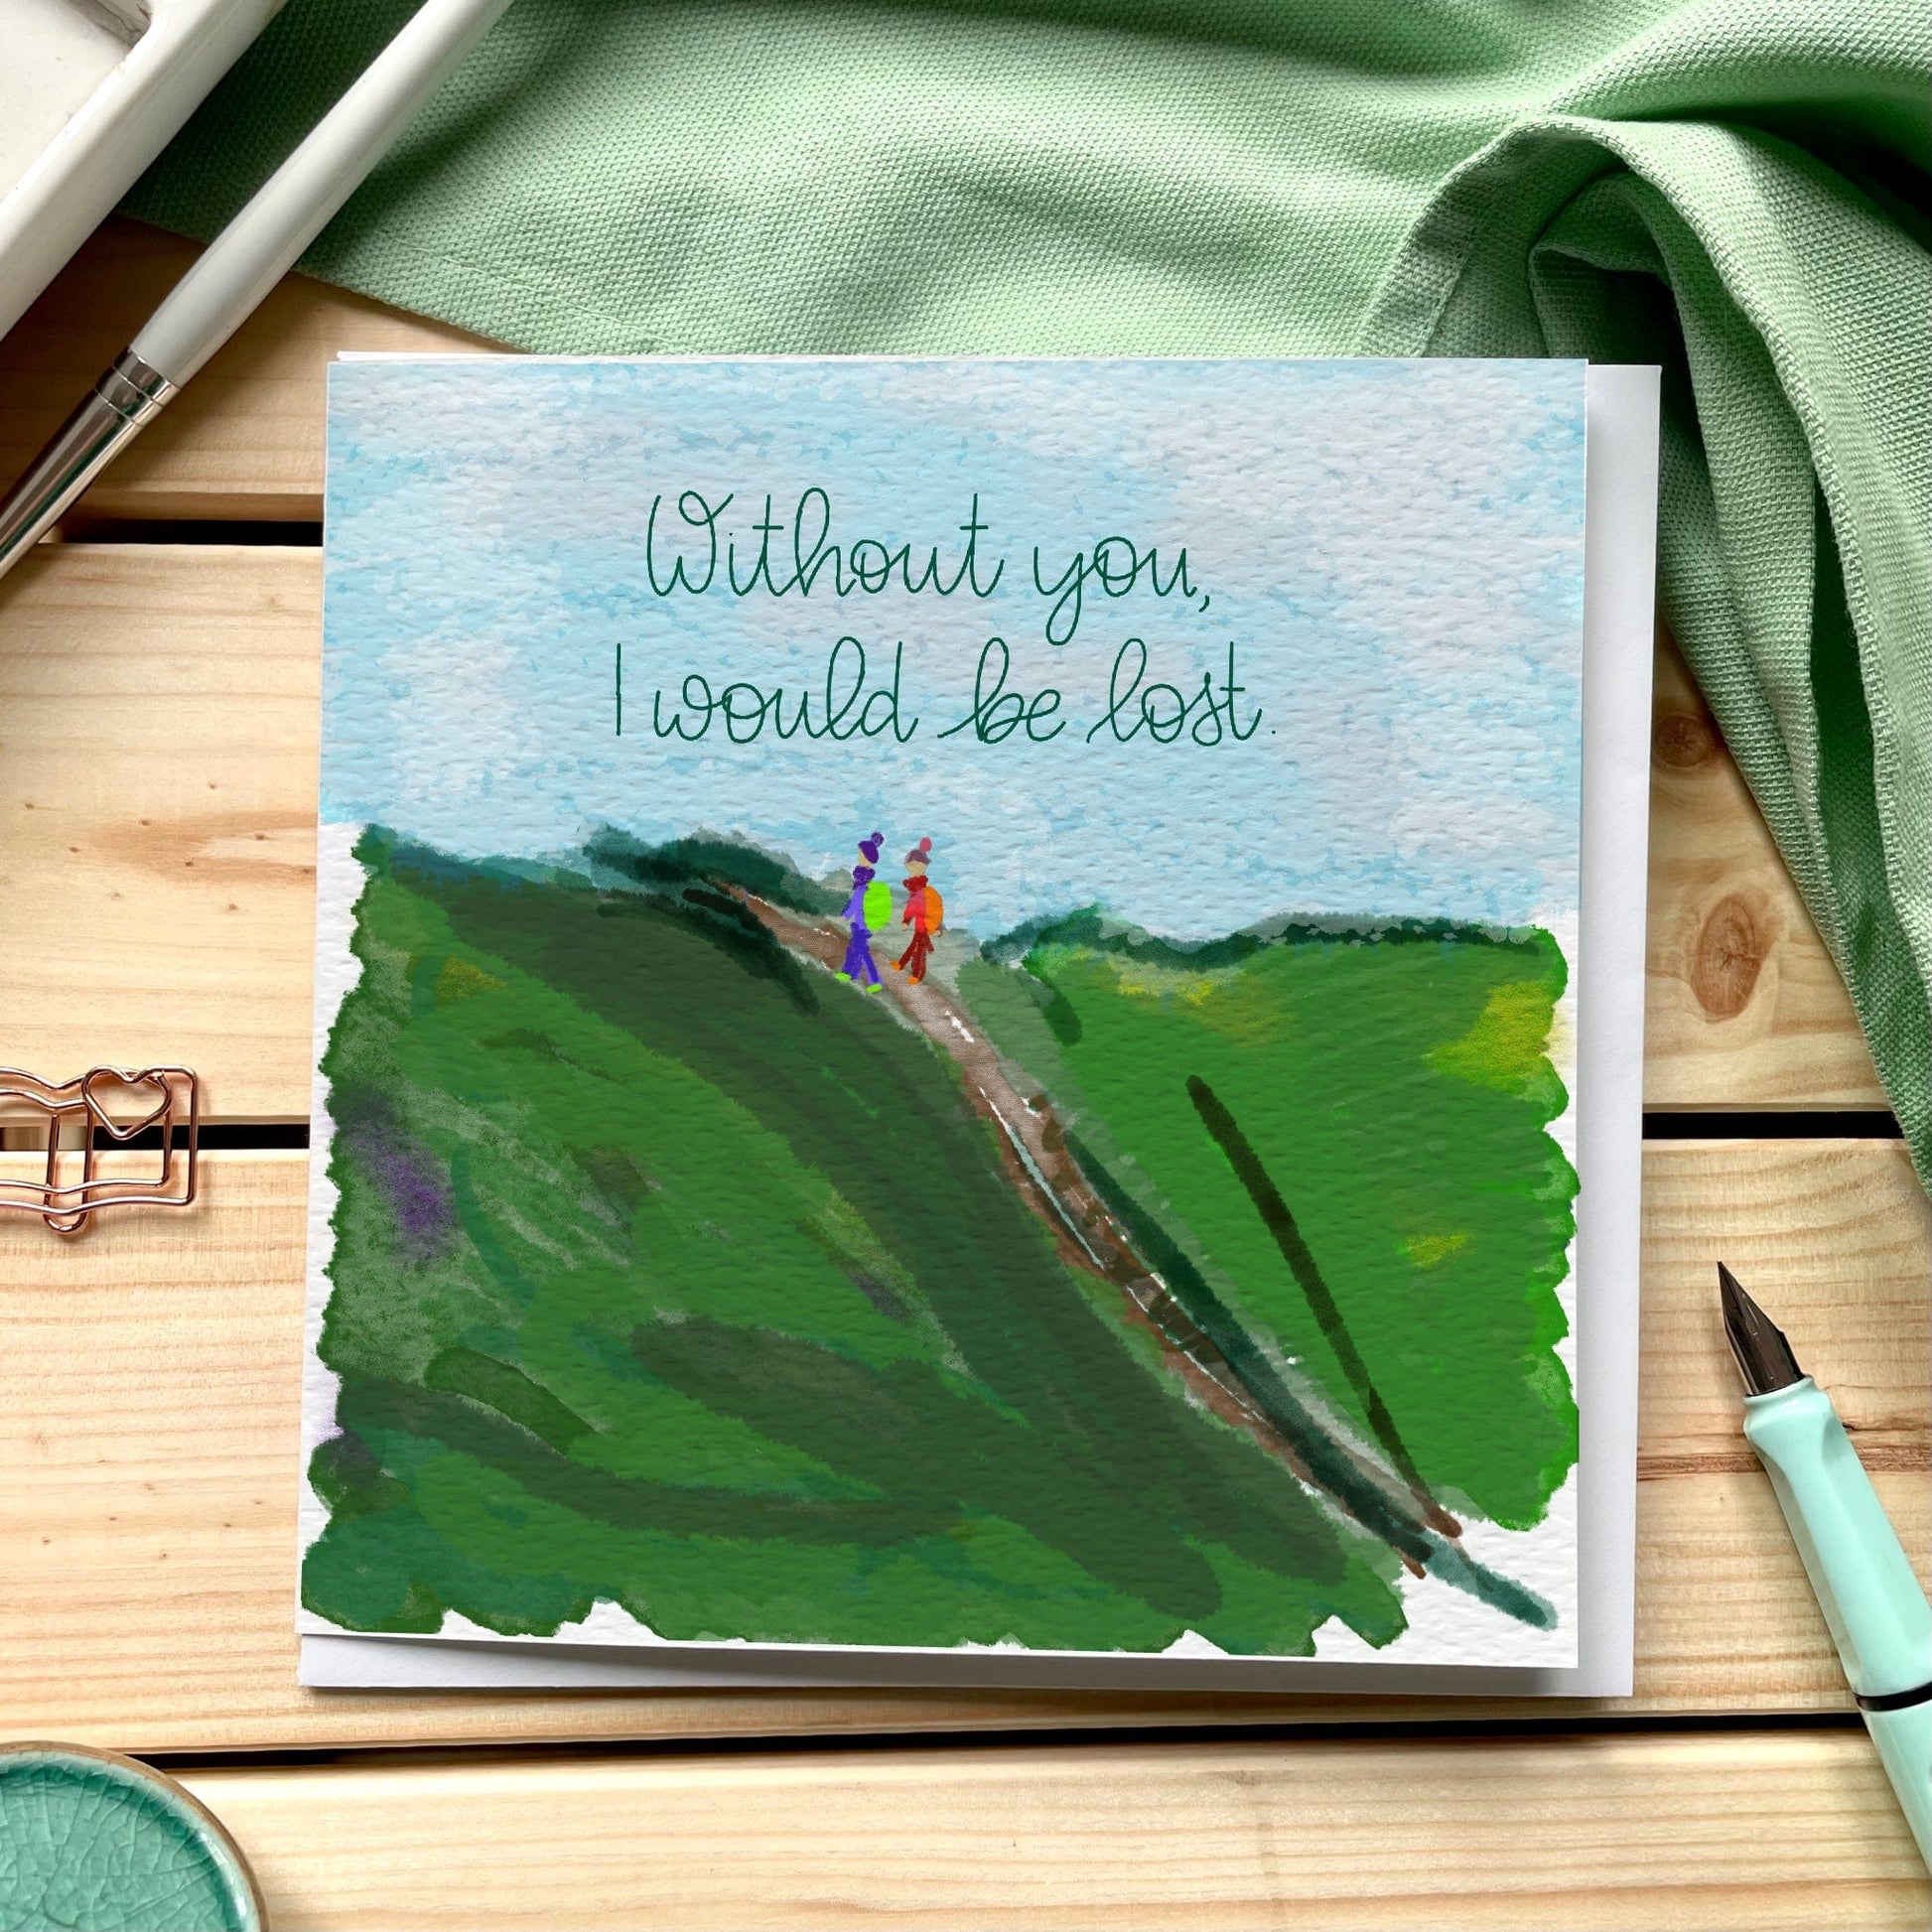 And Hope Designs Cards Without you I would be lost hillwalking card